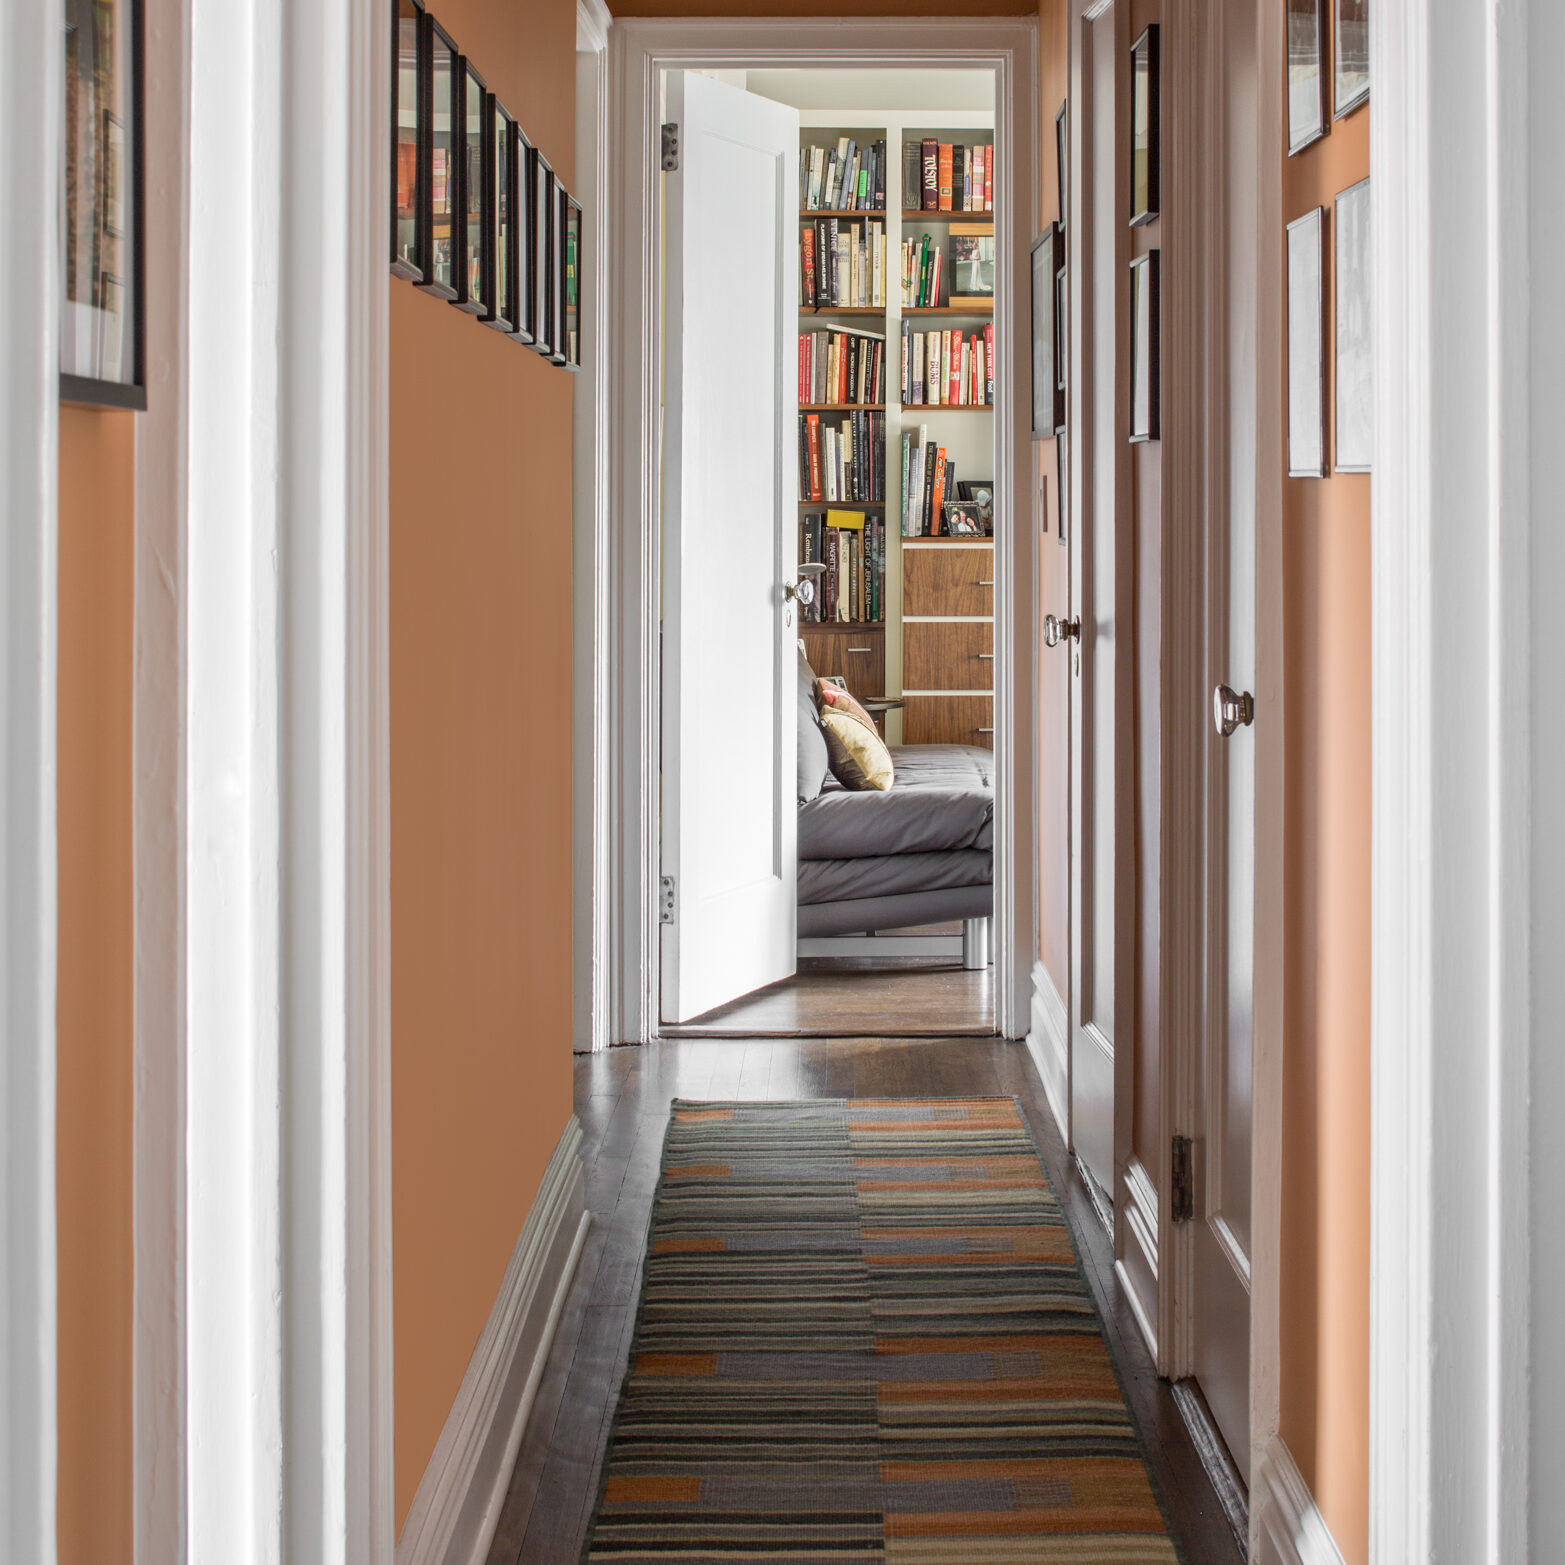 Hallway renovation with peach paint and restored trim